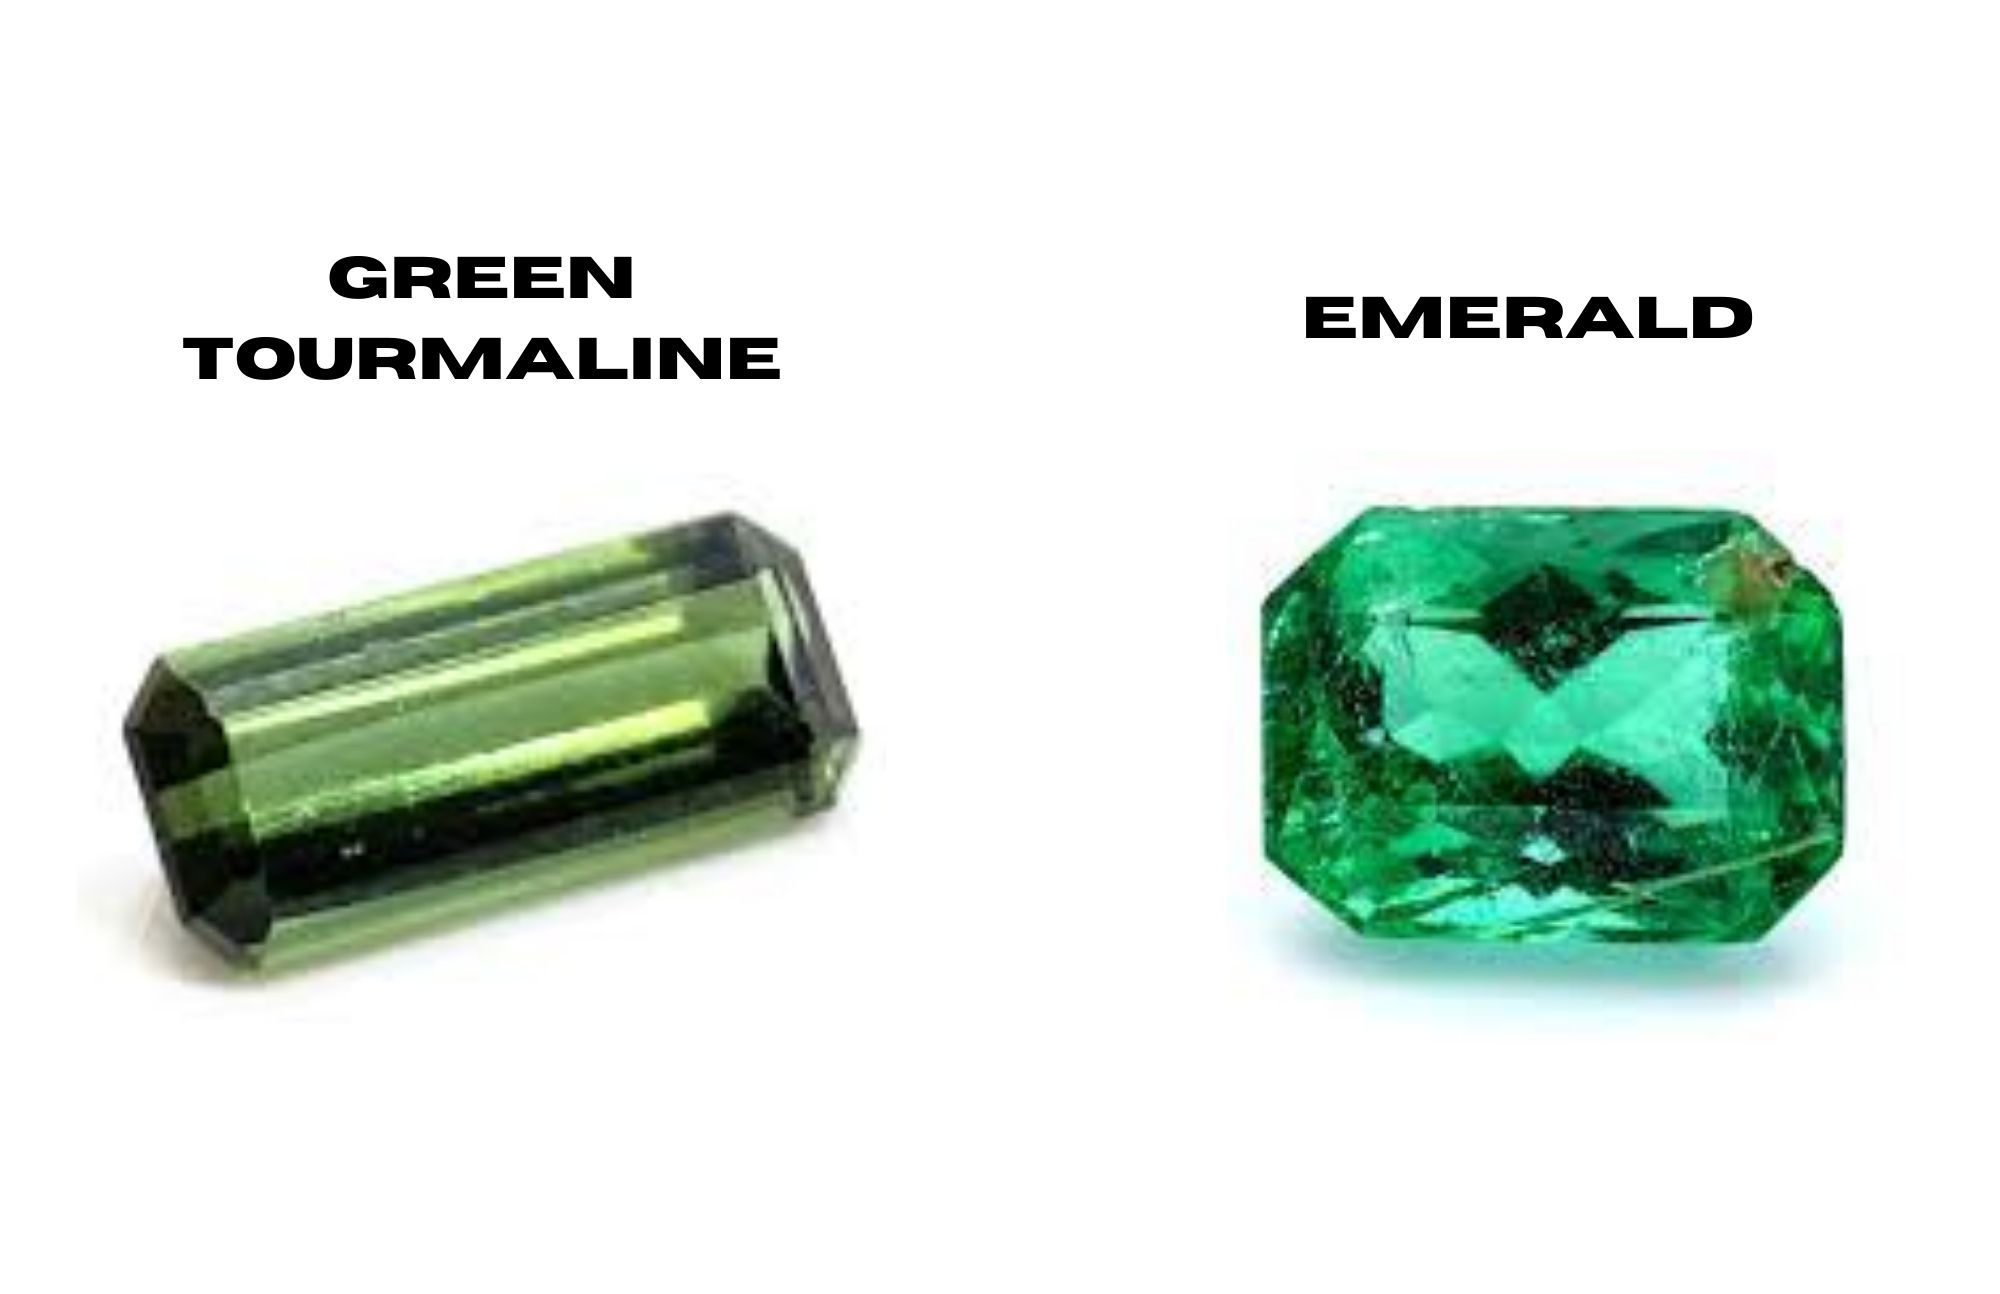 The difference between the green green tourmaline on the left and the emerald on the right on a white background